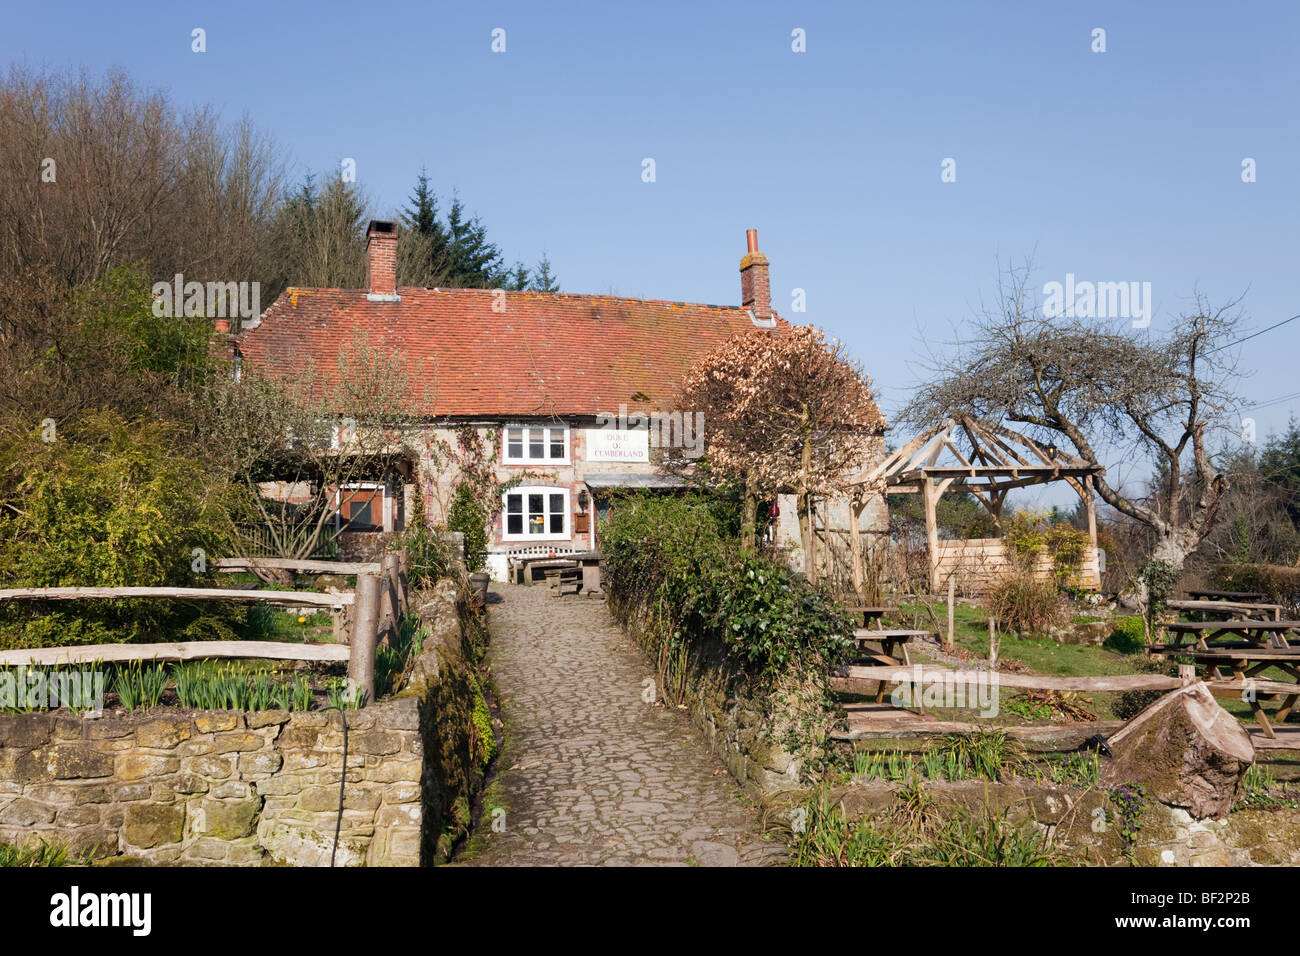 The quaint Duke of Cumberland country pub in hamlet near Midhurst in South Downs National Park. Henley West Sussex England UK Britain Stock Photo